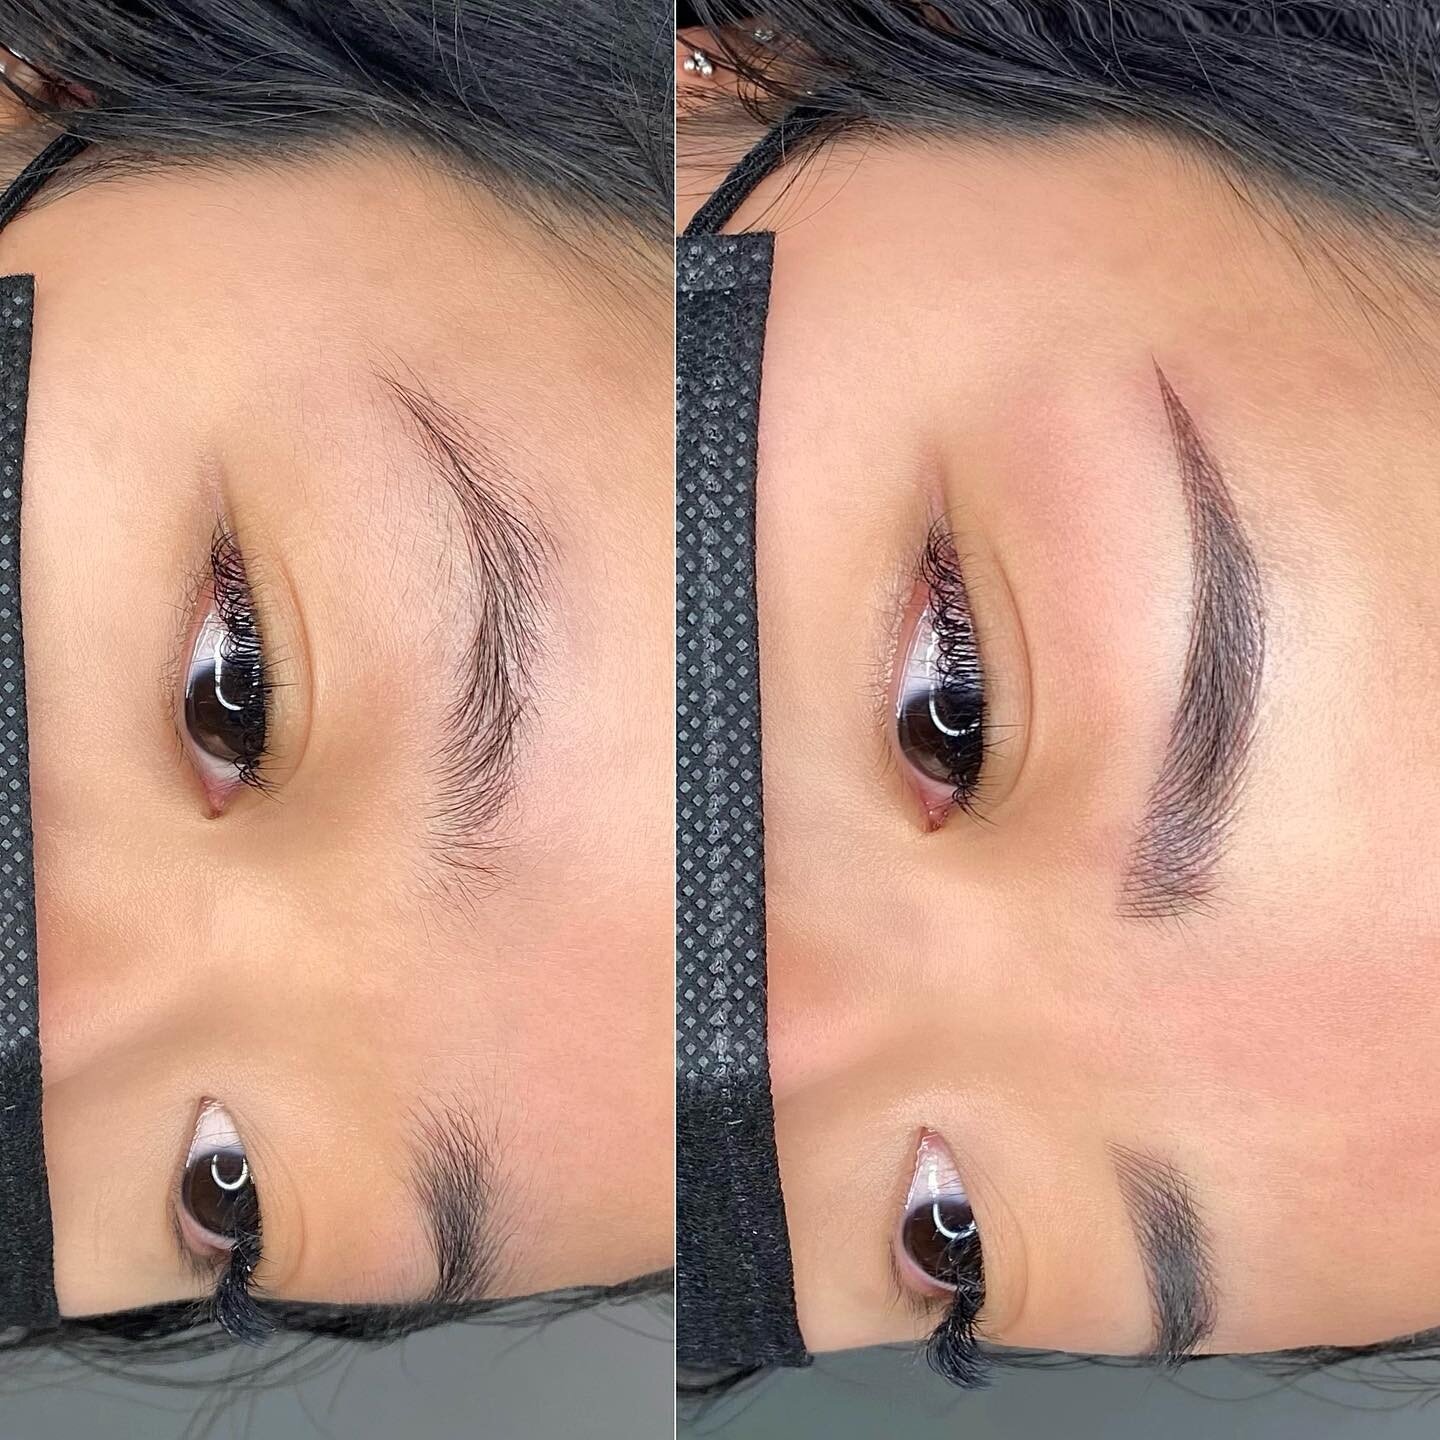 LUXURY NANO BROWS😍 My client wanted more definition and shape to her brows. We achieved this look by giving her tighter lines and adding targeted shading throughout her eyebrows. 

Ready for your nano dream brows? DM for inquiry 🥰

Technique: Nano 